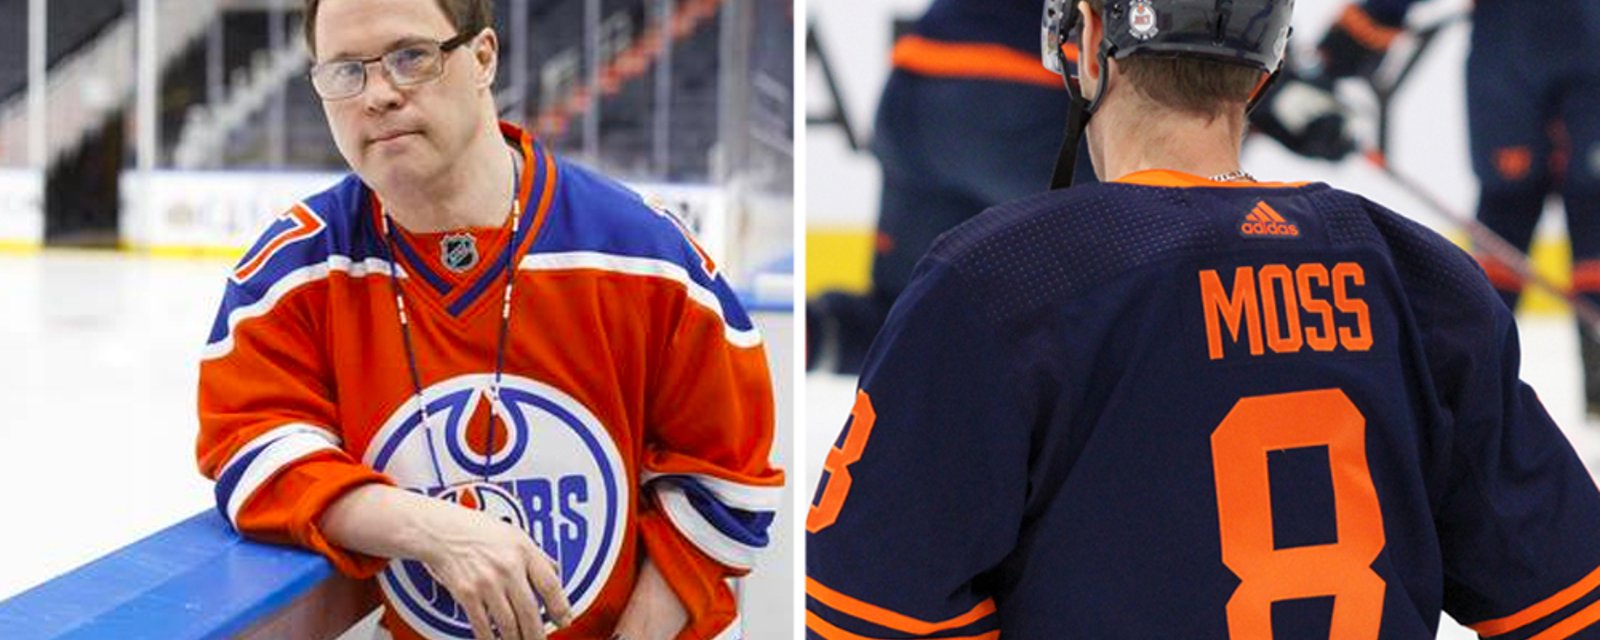 The Oilers pay tribute to Joey Moss in pre-game skate